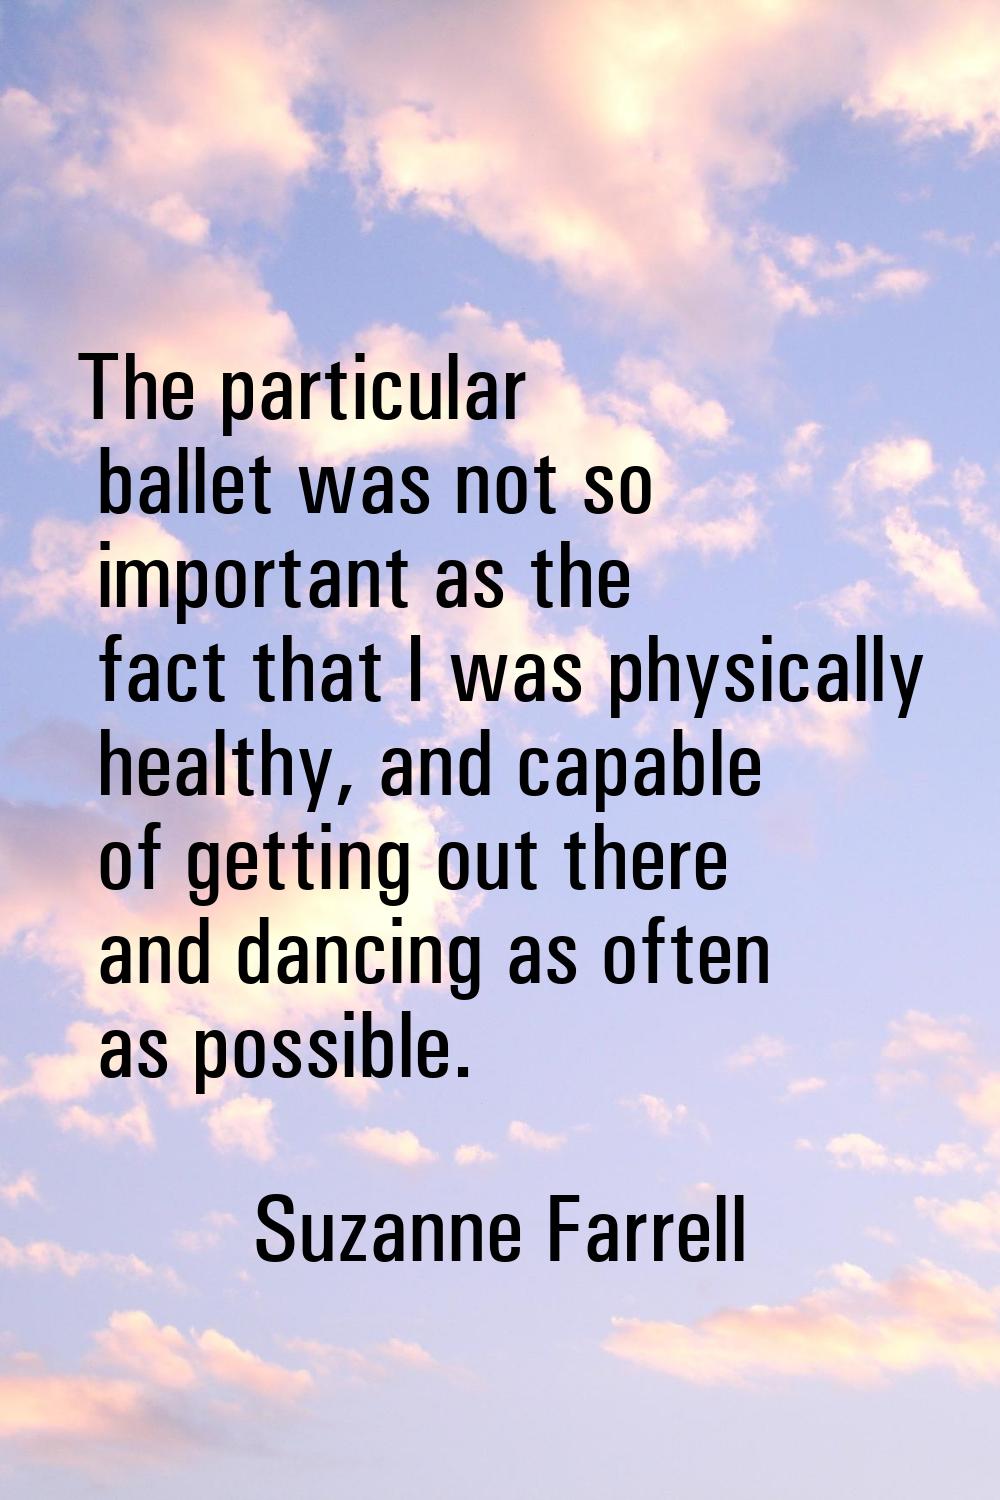 The particular ballet was not so important as the fact that I was physically healthy, and capable o